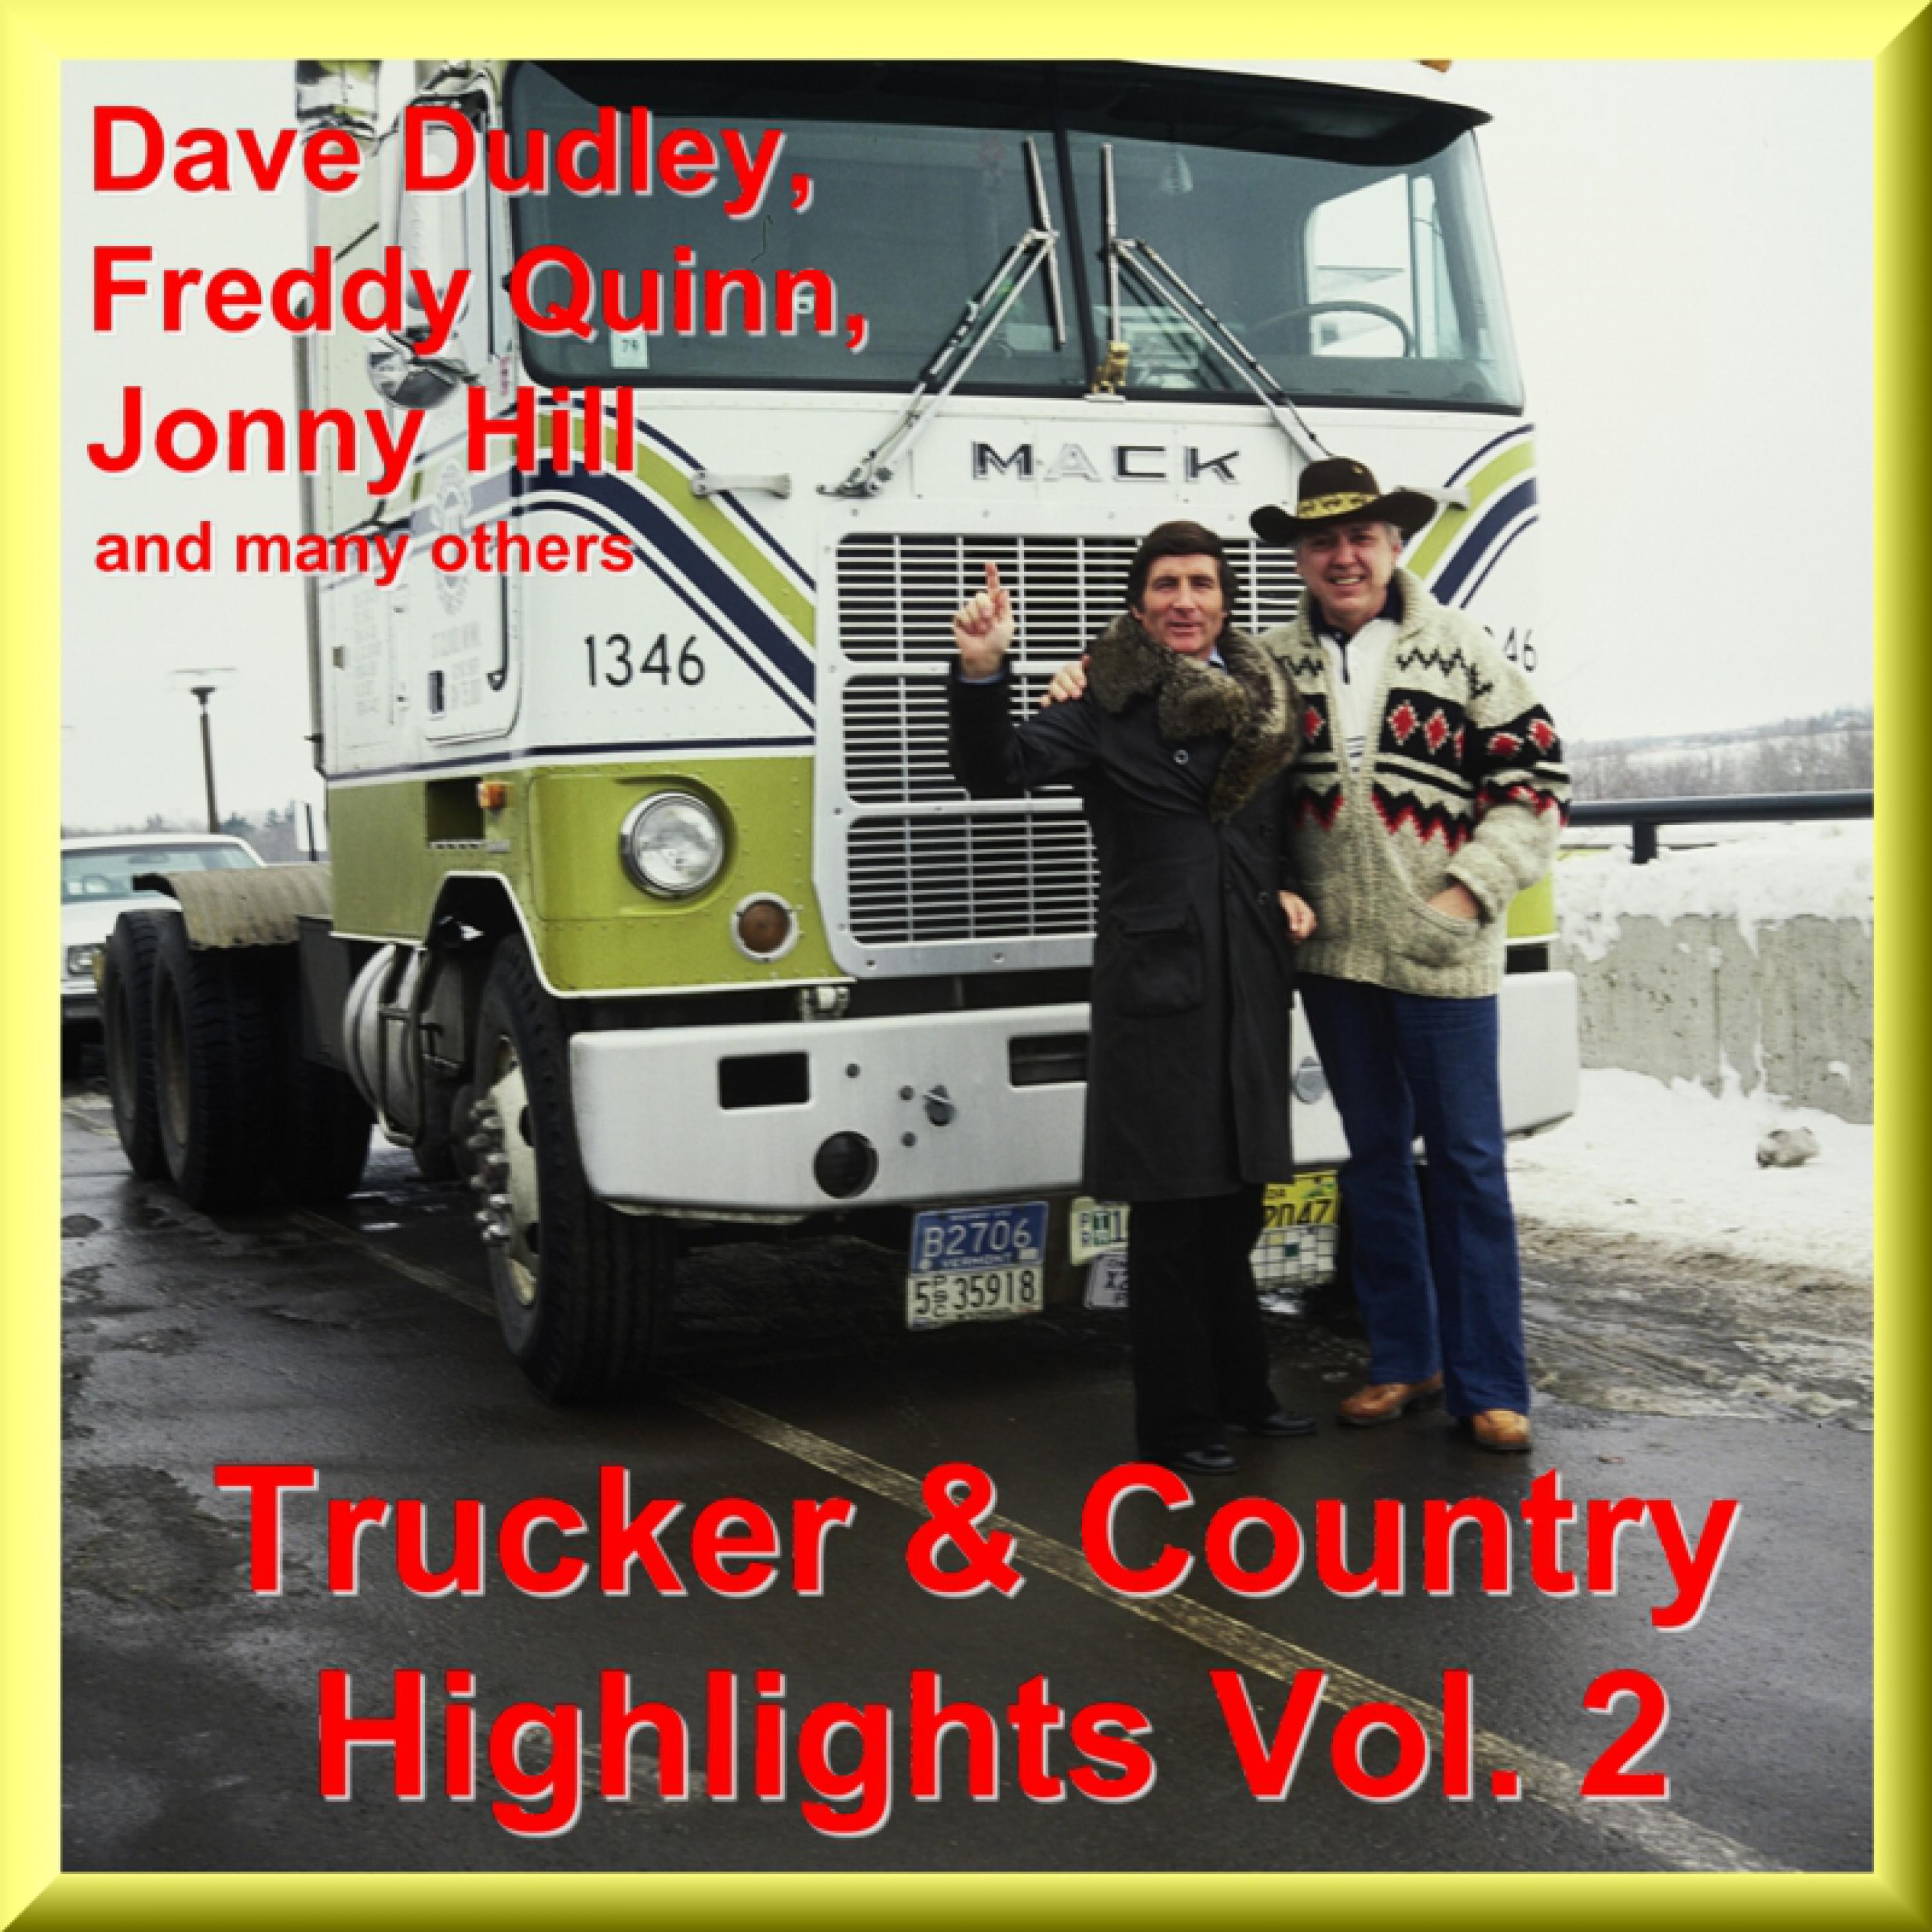 Trucker Und Country Hits Vol. 2 - With Dave Dudley, Freddy Quinn, Jonny Hill and Many Others